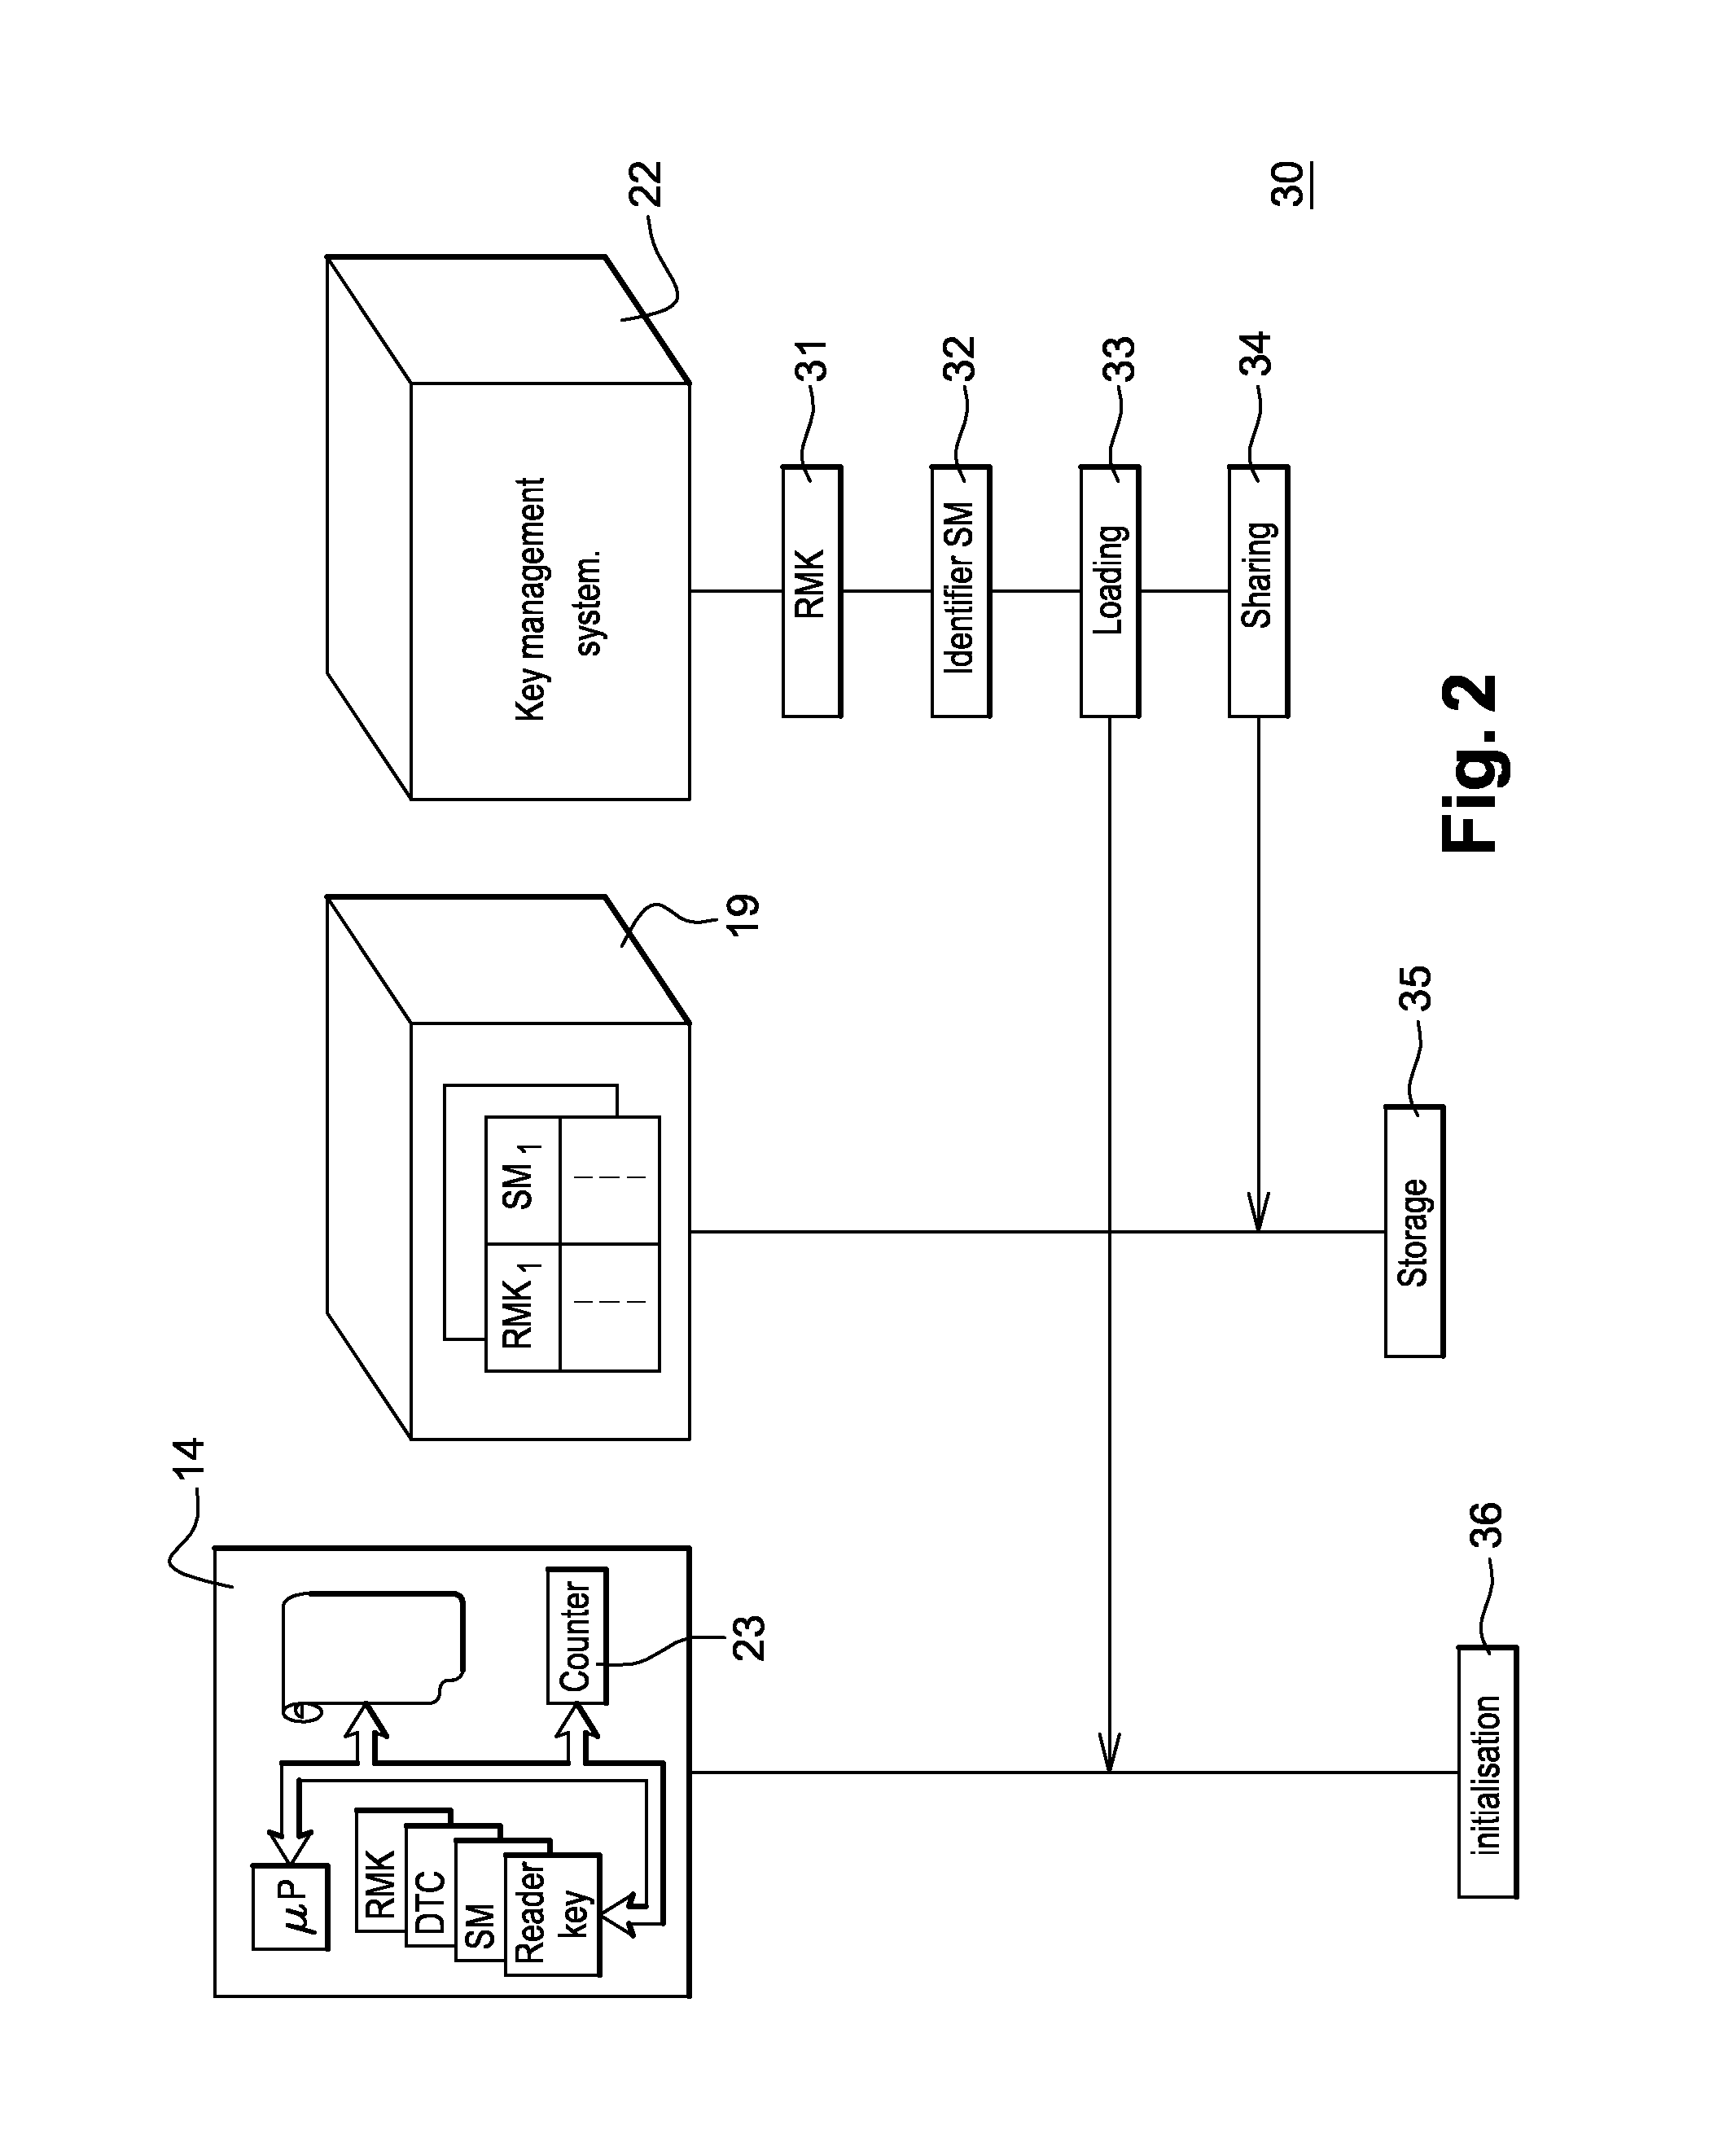 System and method for securing communications between a card reader device and a remote server